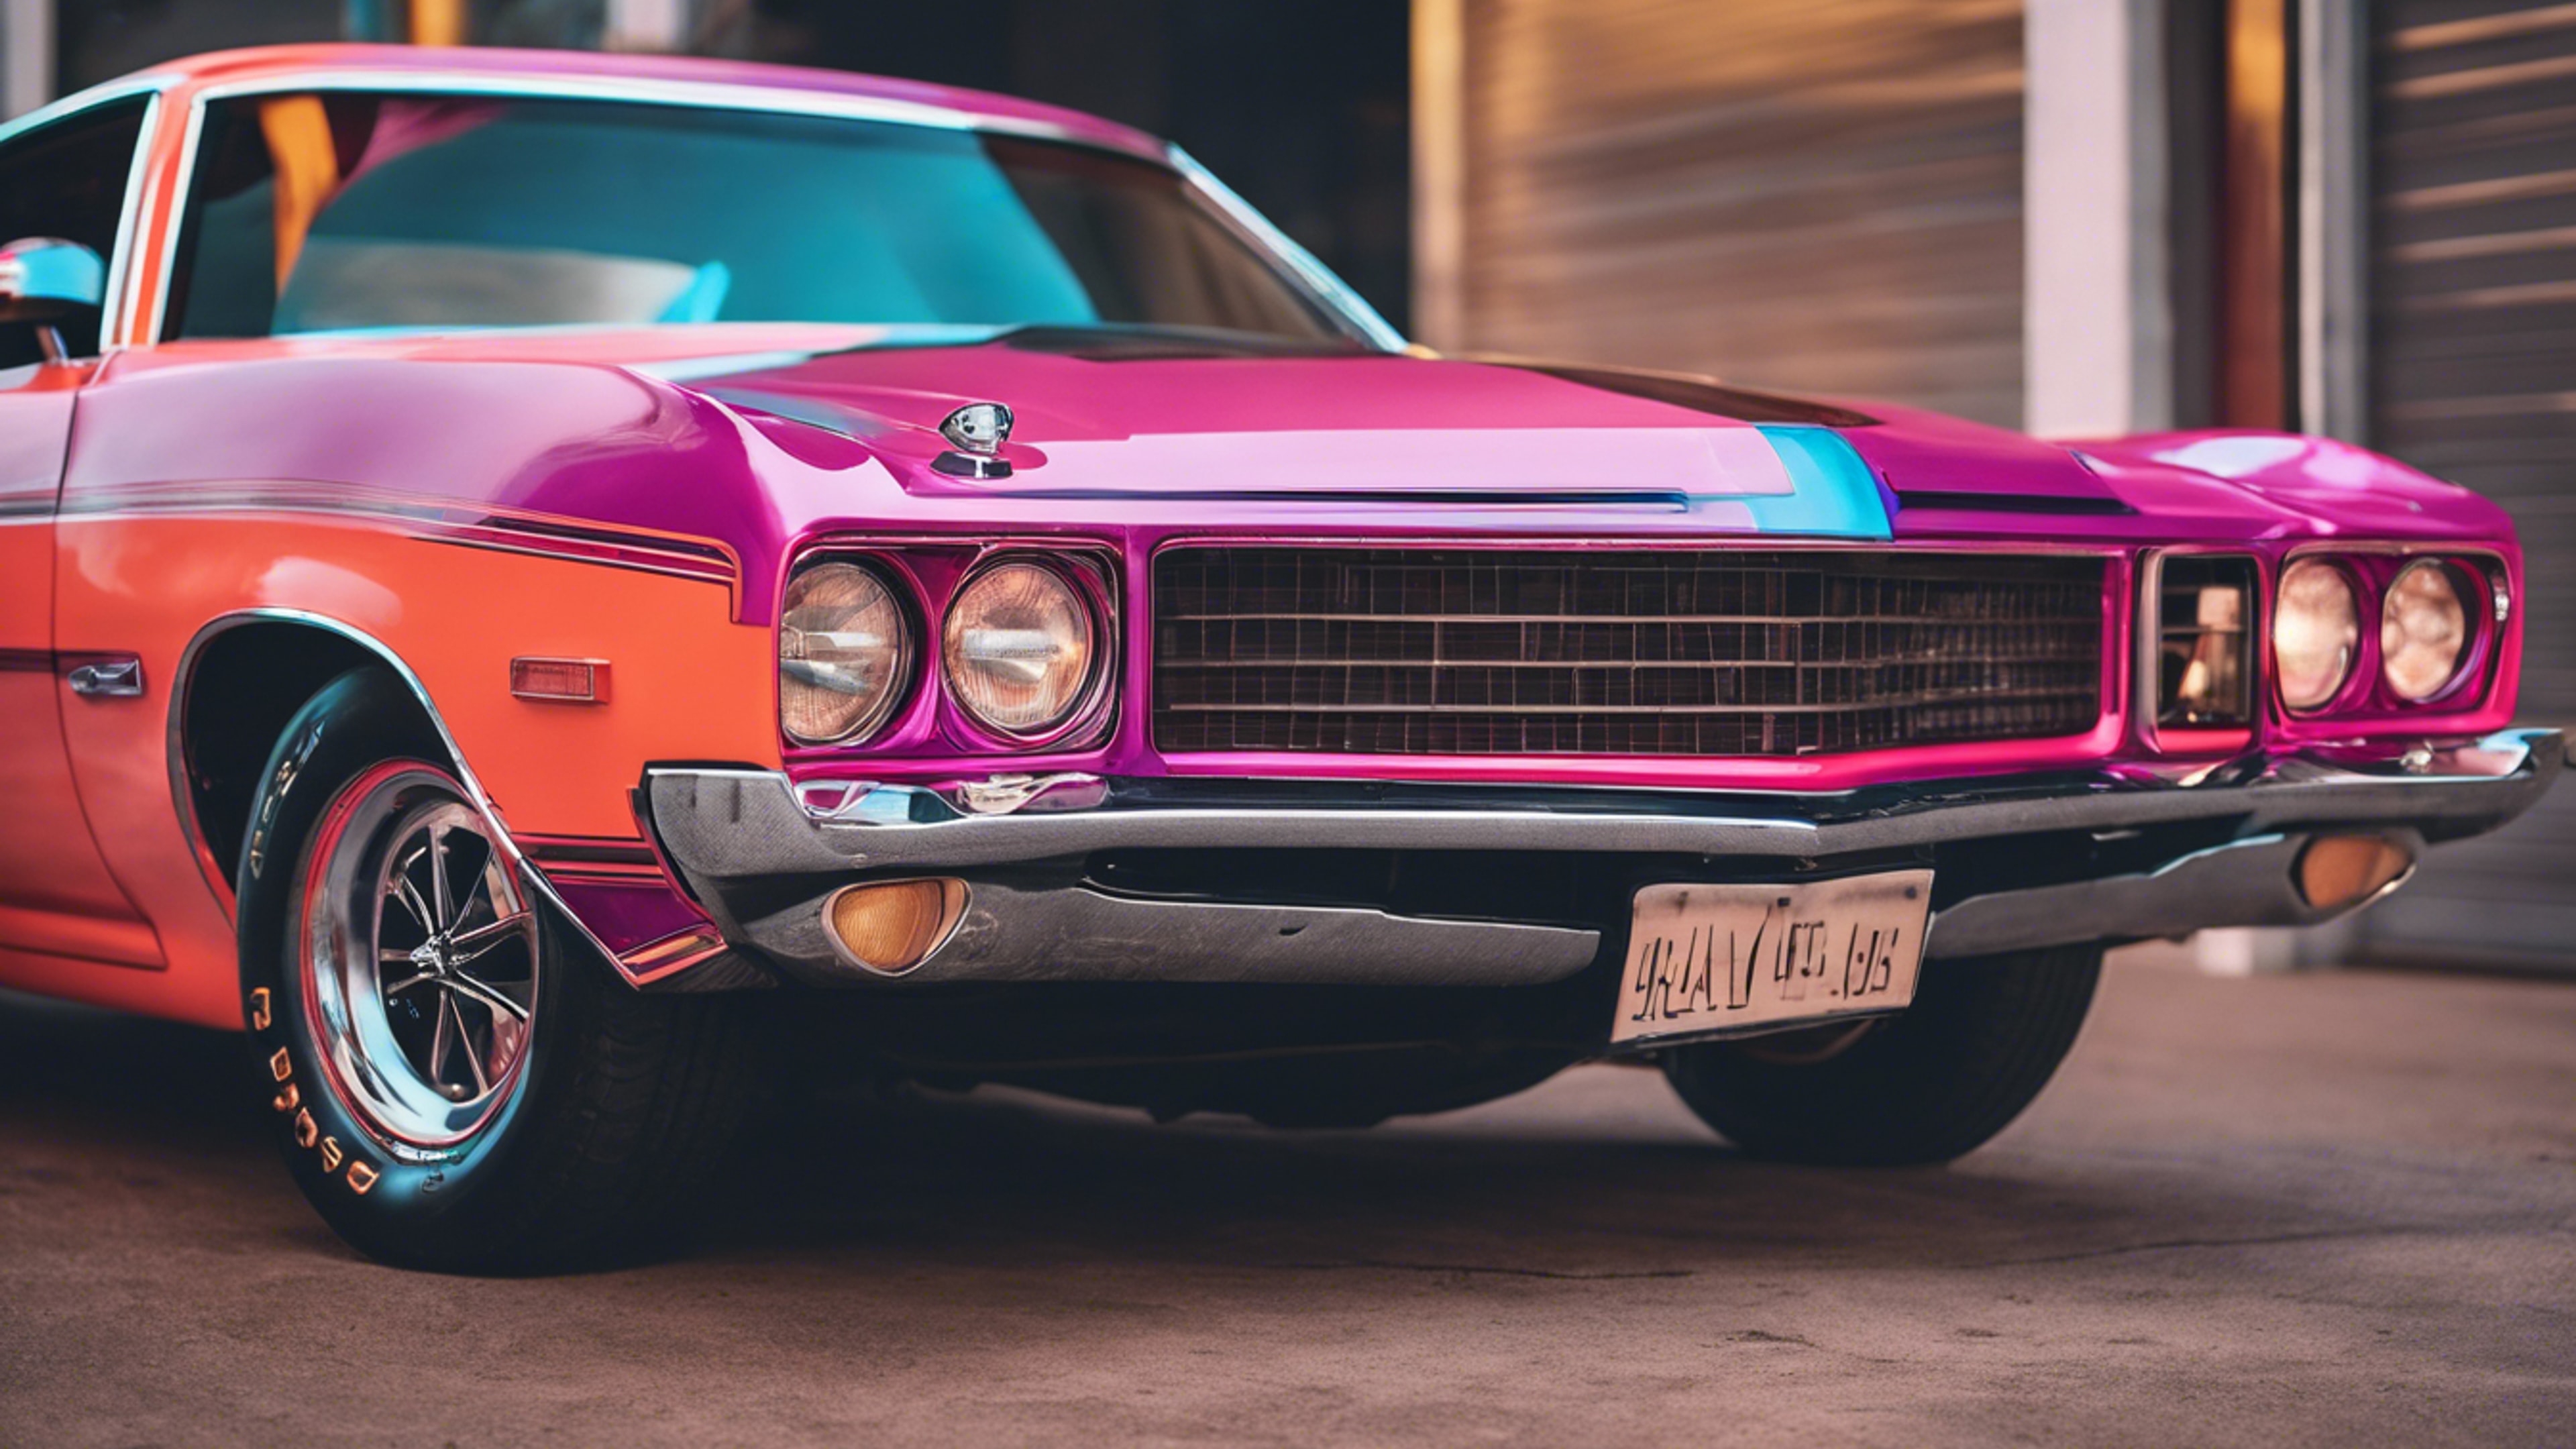 A classic American muscle car from the 1970s, printed in bright neon colors Обои[fa60d4cf89e348ffade4]